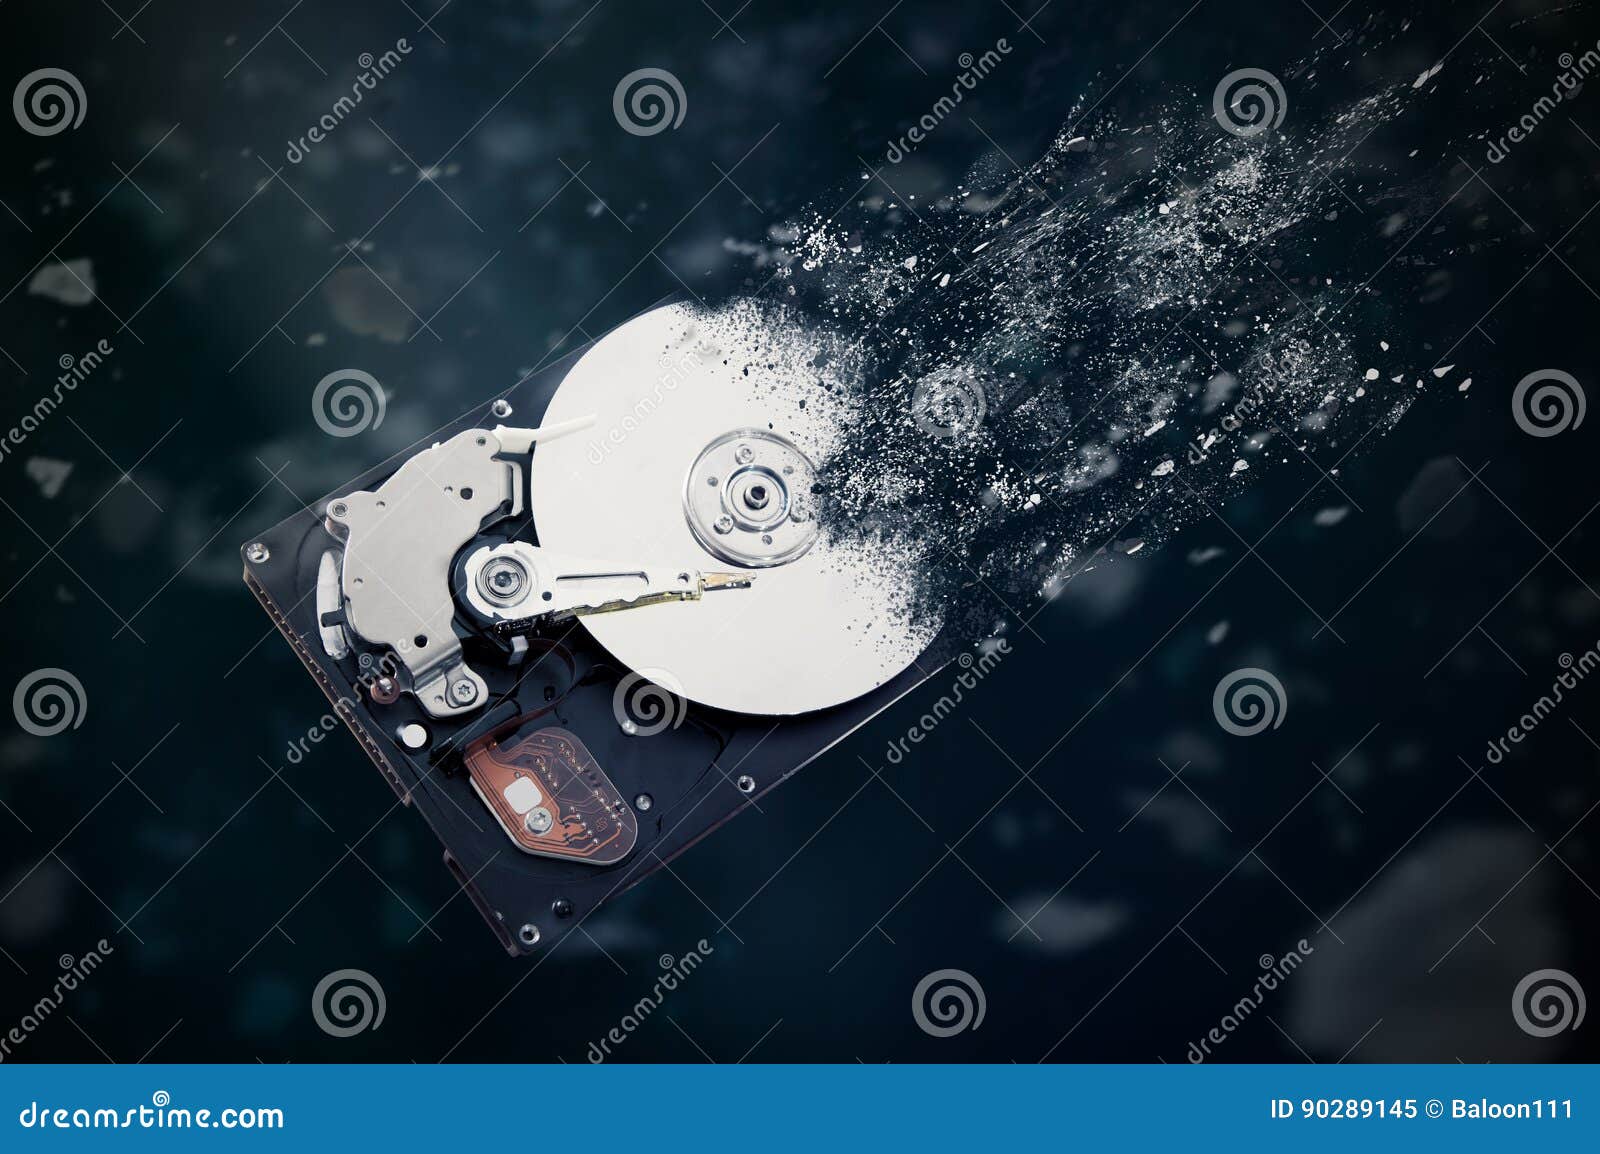 the old hard disk drive is disintegrating in space.